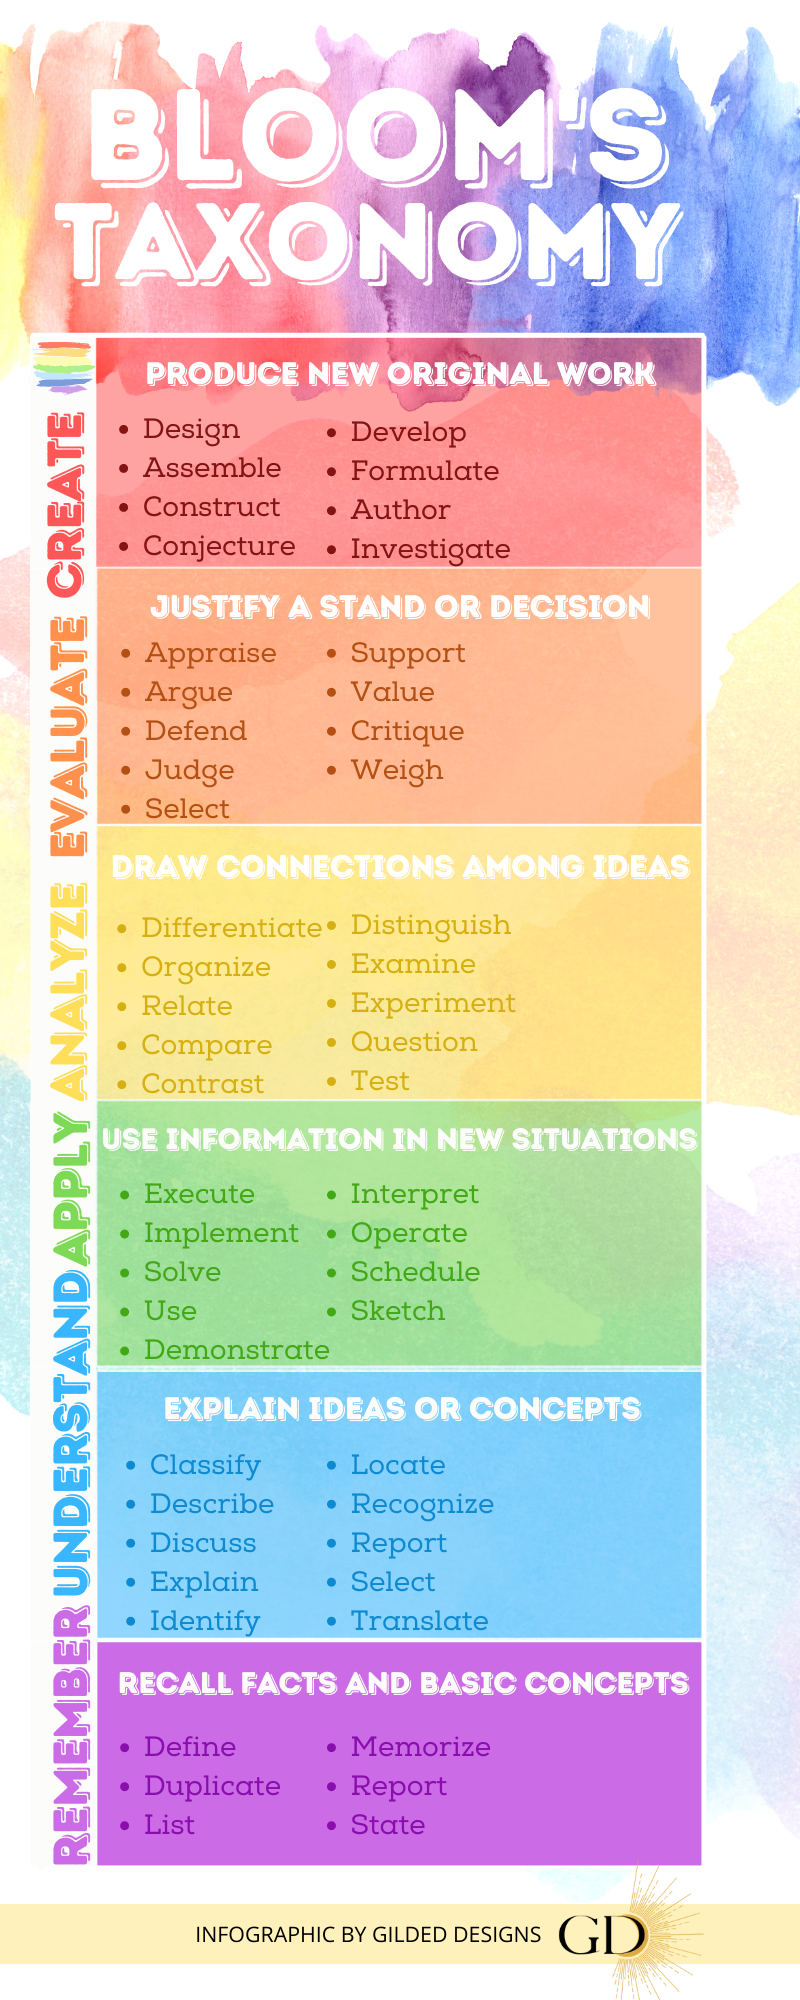 This is a photo of blooms taxonomy as an infographIC